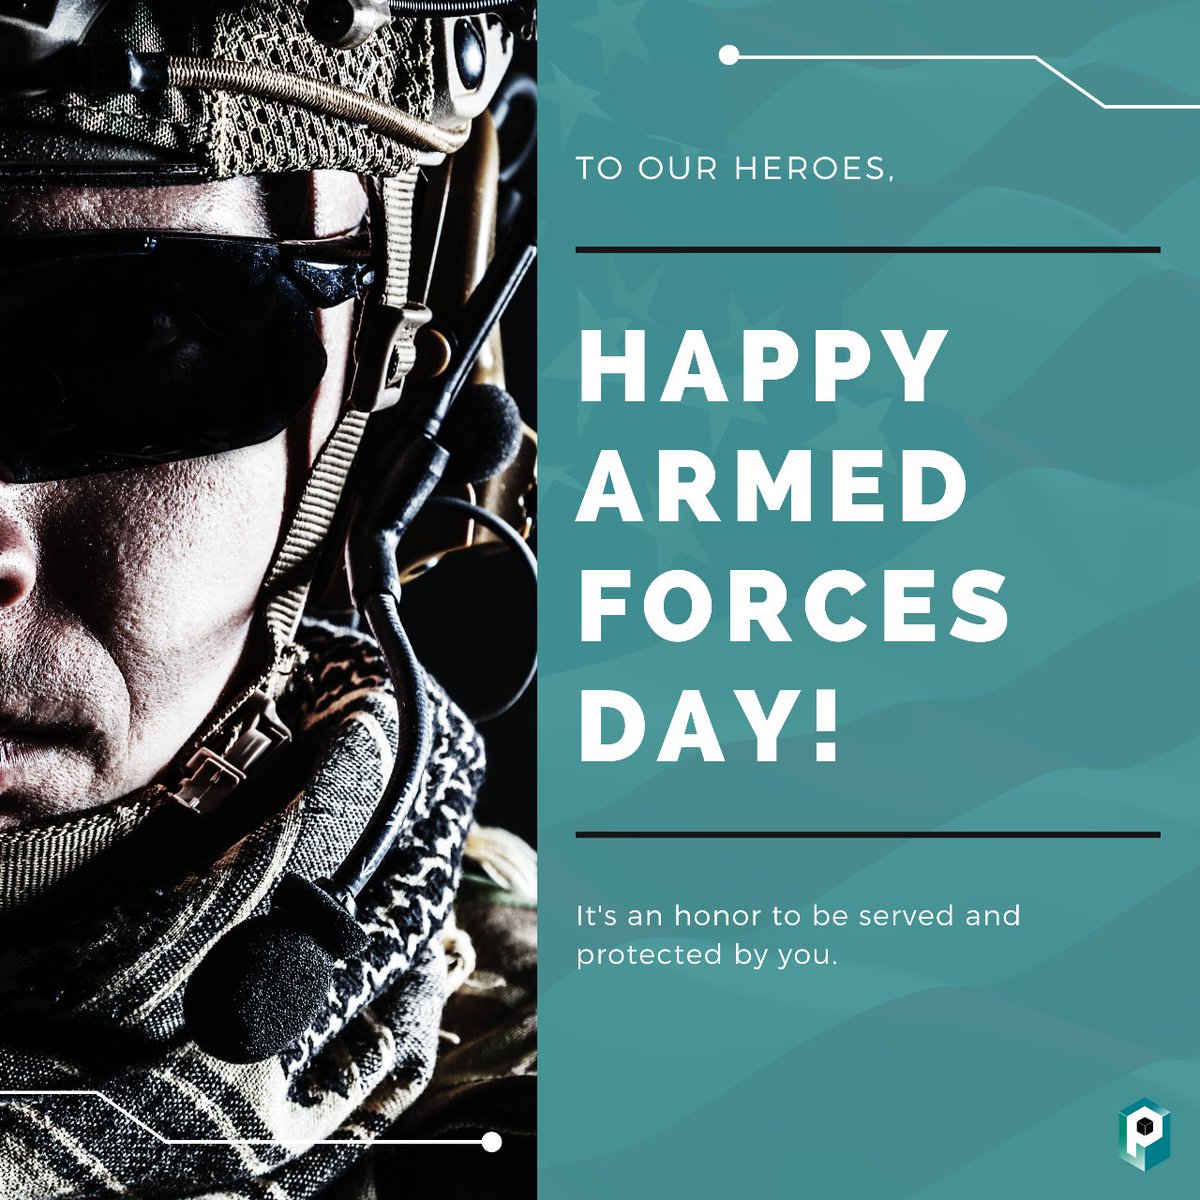 Today, on National Armed Forces Day, we honor the brave men and women who serve our country with courage, dedication, and sacrifice. We are grateful for their service and commitment to protecting our freedoms and way of life. #ArmedForcesDay #PowerStorageSolutions #PWRSS